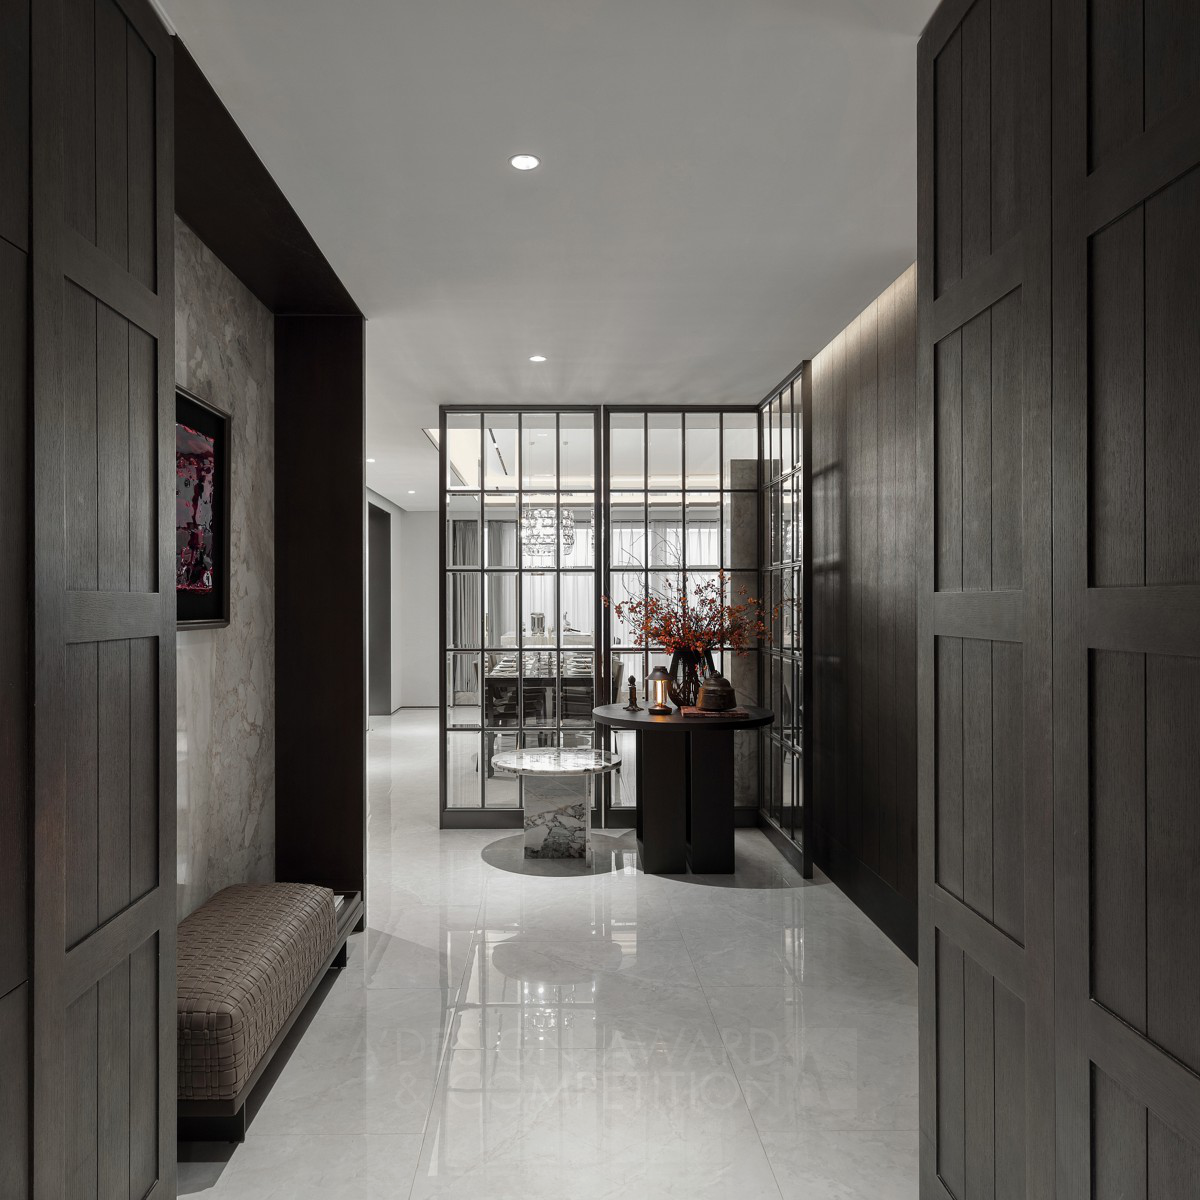 Changzhou Prime Mansion Private Home by Jian Zhang